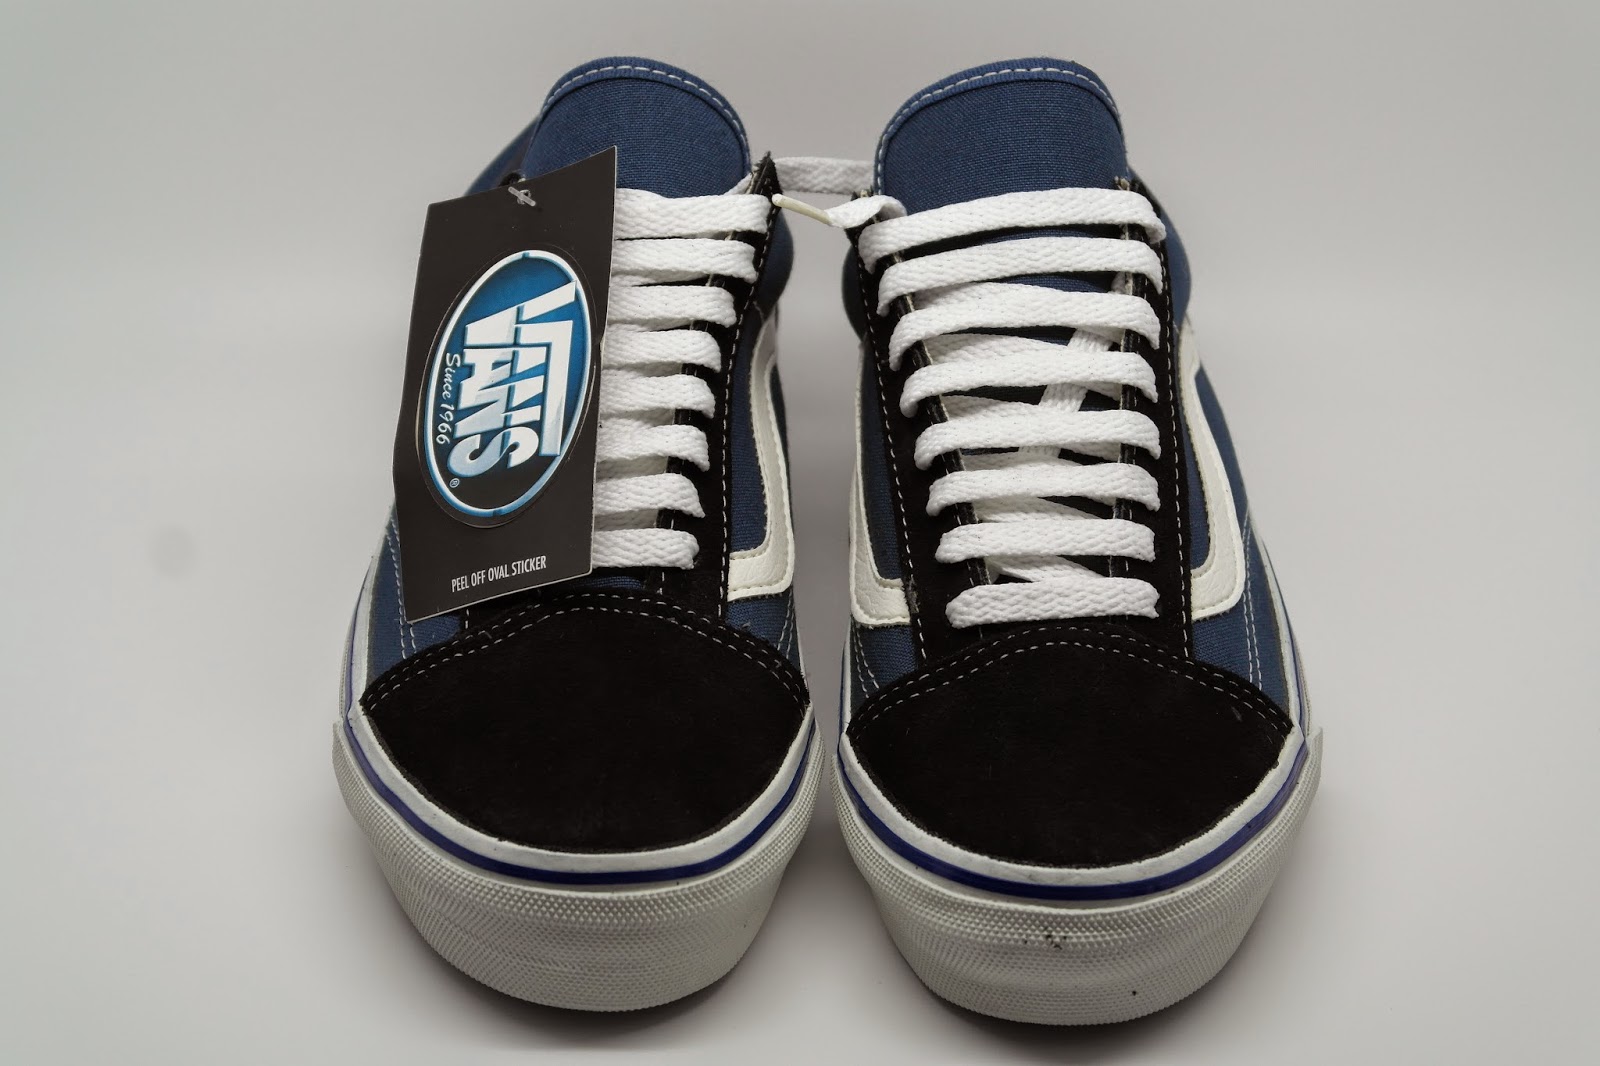 theothersideofthepillow: vintage VANS style #36 white on navy OLD SKOOL  suede canvas SKATEBOARD SHOES 90s MADE IN USA original US7  US11